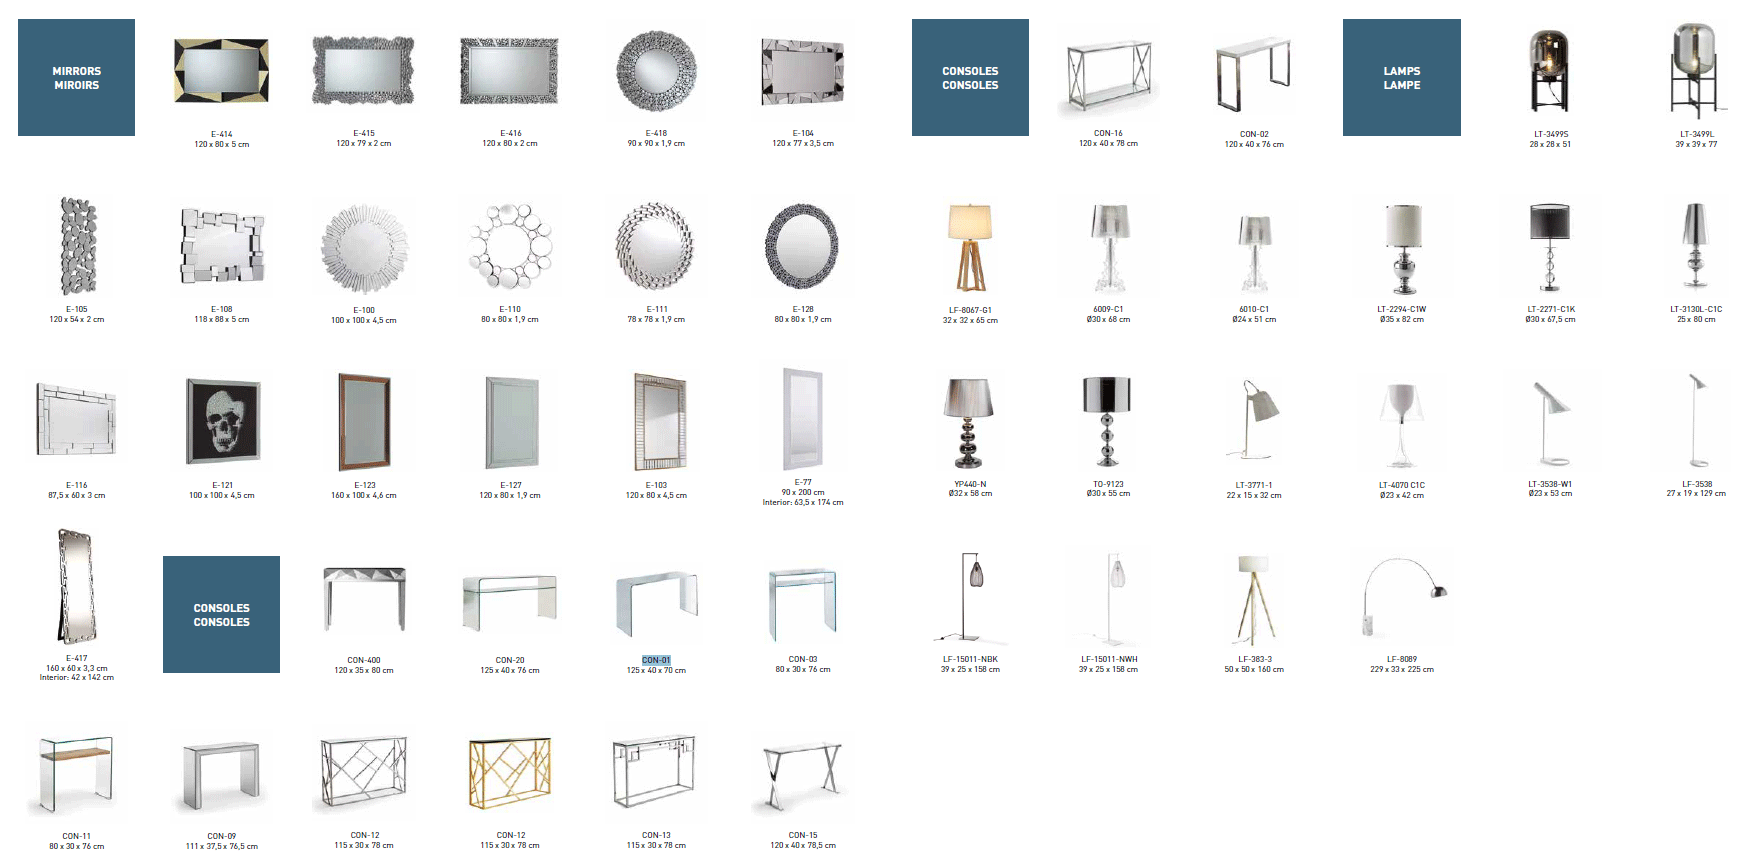 Wallunits Hallway Console tables and Mirrors SPECIFICATIONS part1